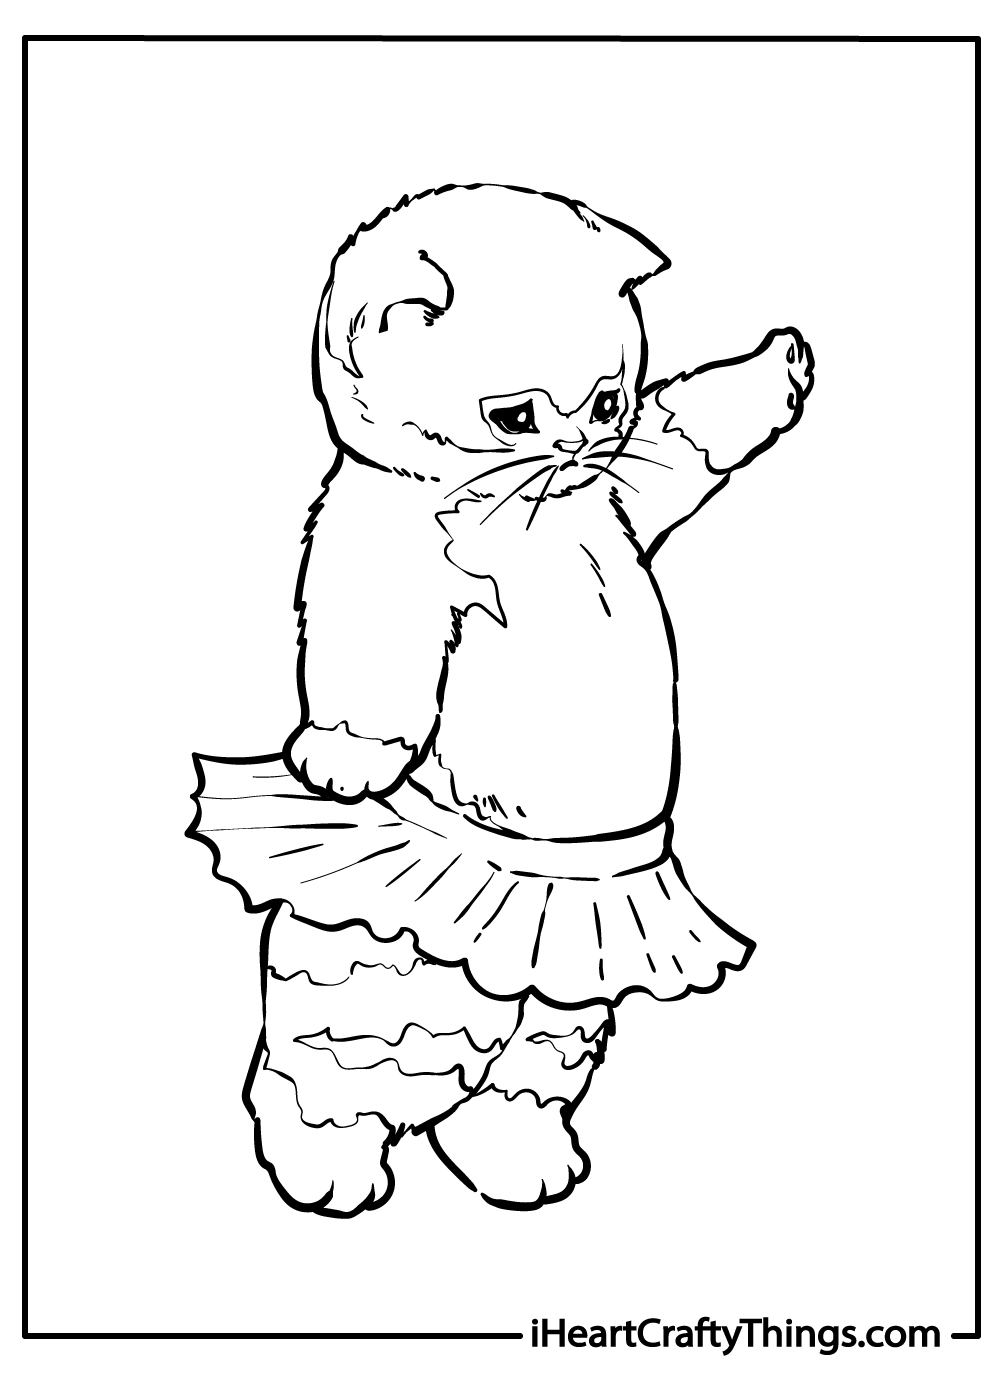 new cat coloring sheet free download